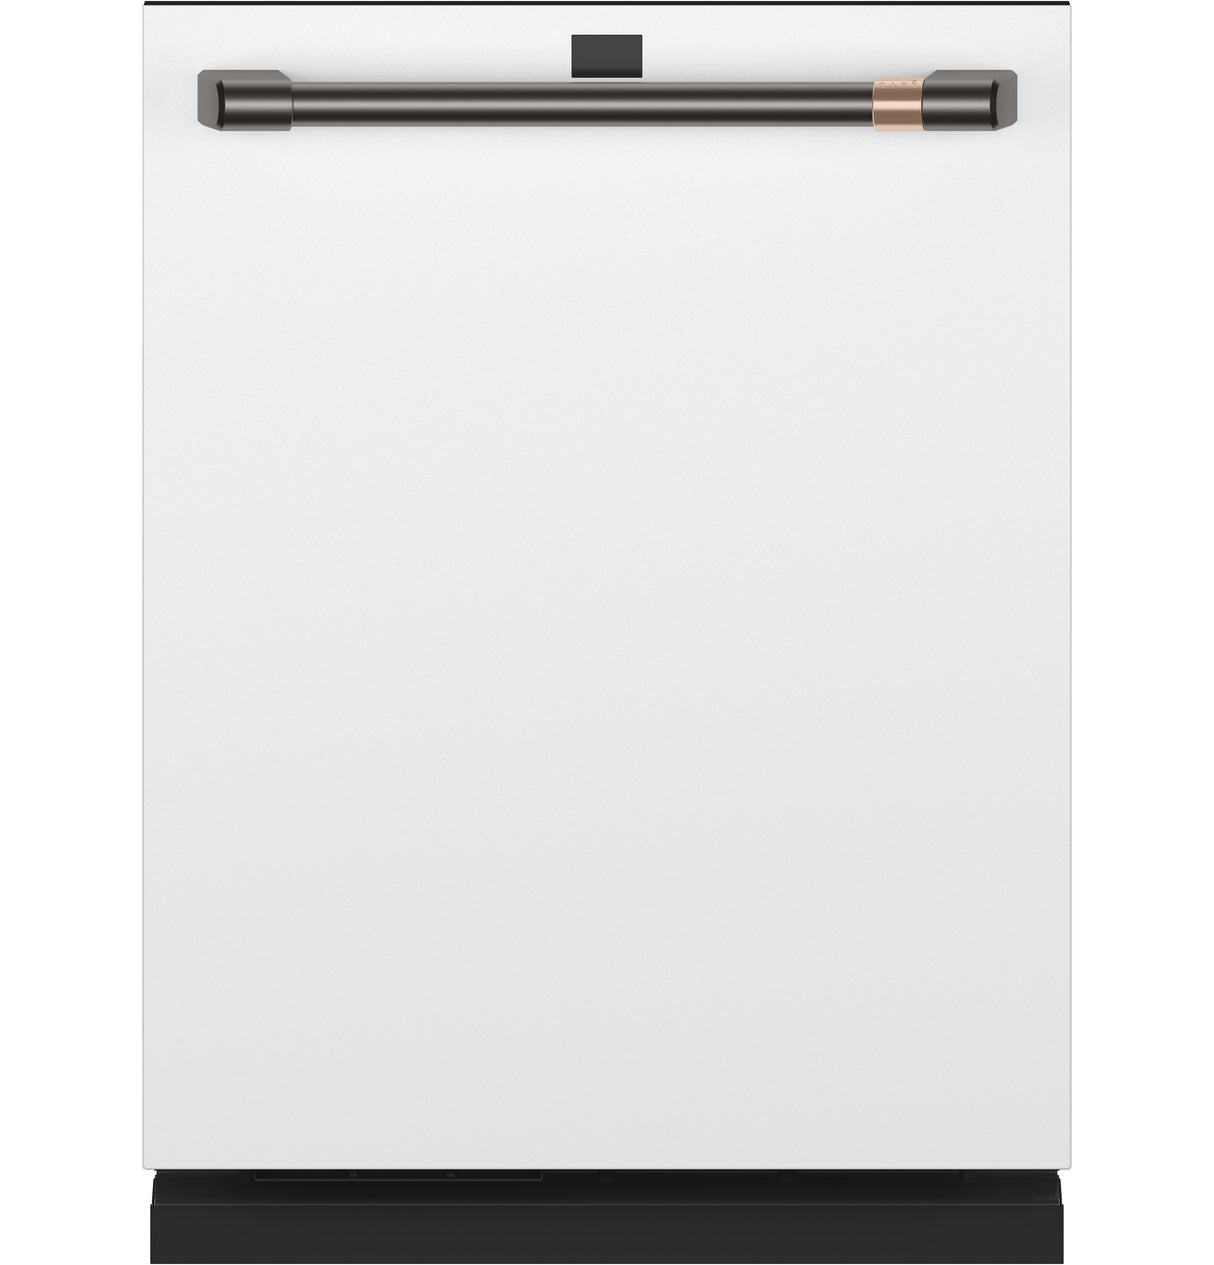 Caf(eback)(TM) ENERGY STAR(R) Smart Stainless Steel Interior Dishwasher with Sanitize and Ultra Wash & Dual Convection Ultra Dry - (CDT875P4NW2)